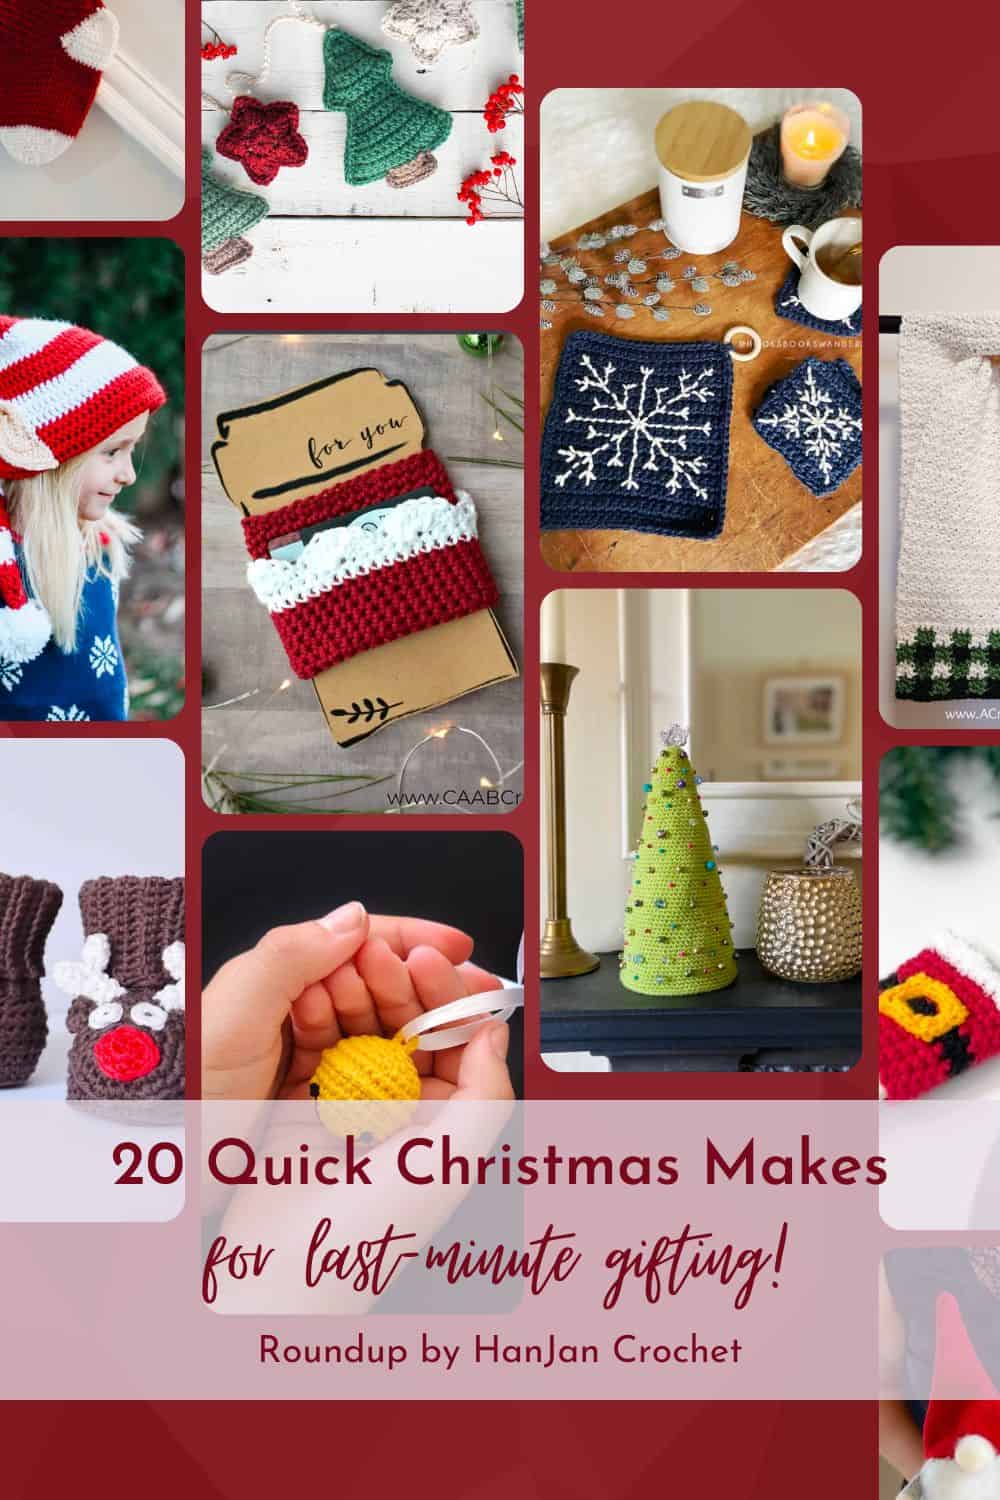 20 Quick Christmas Makes